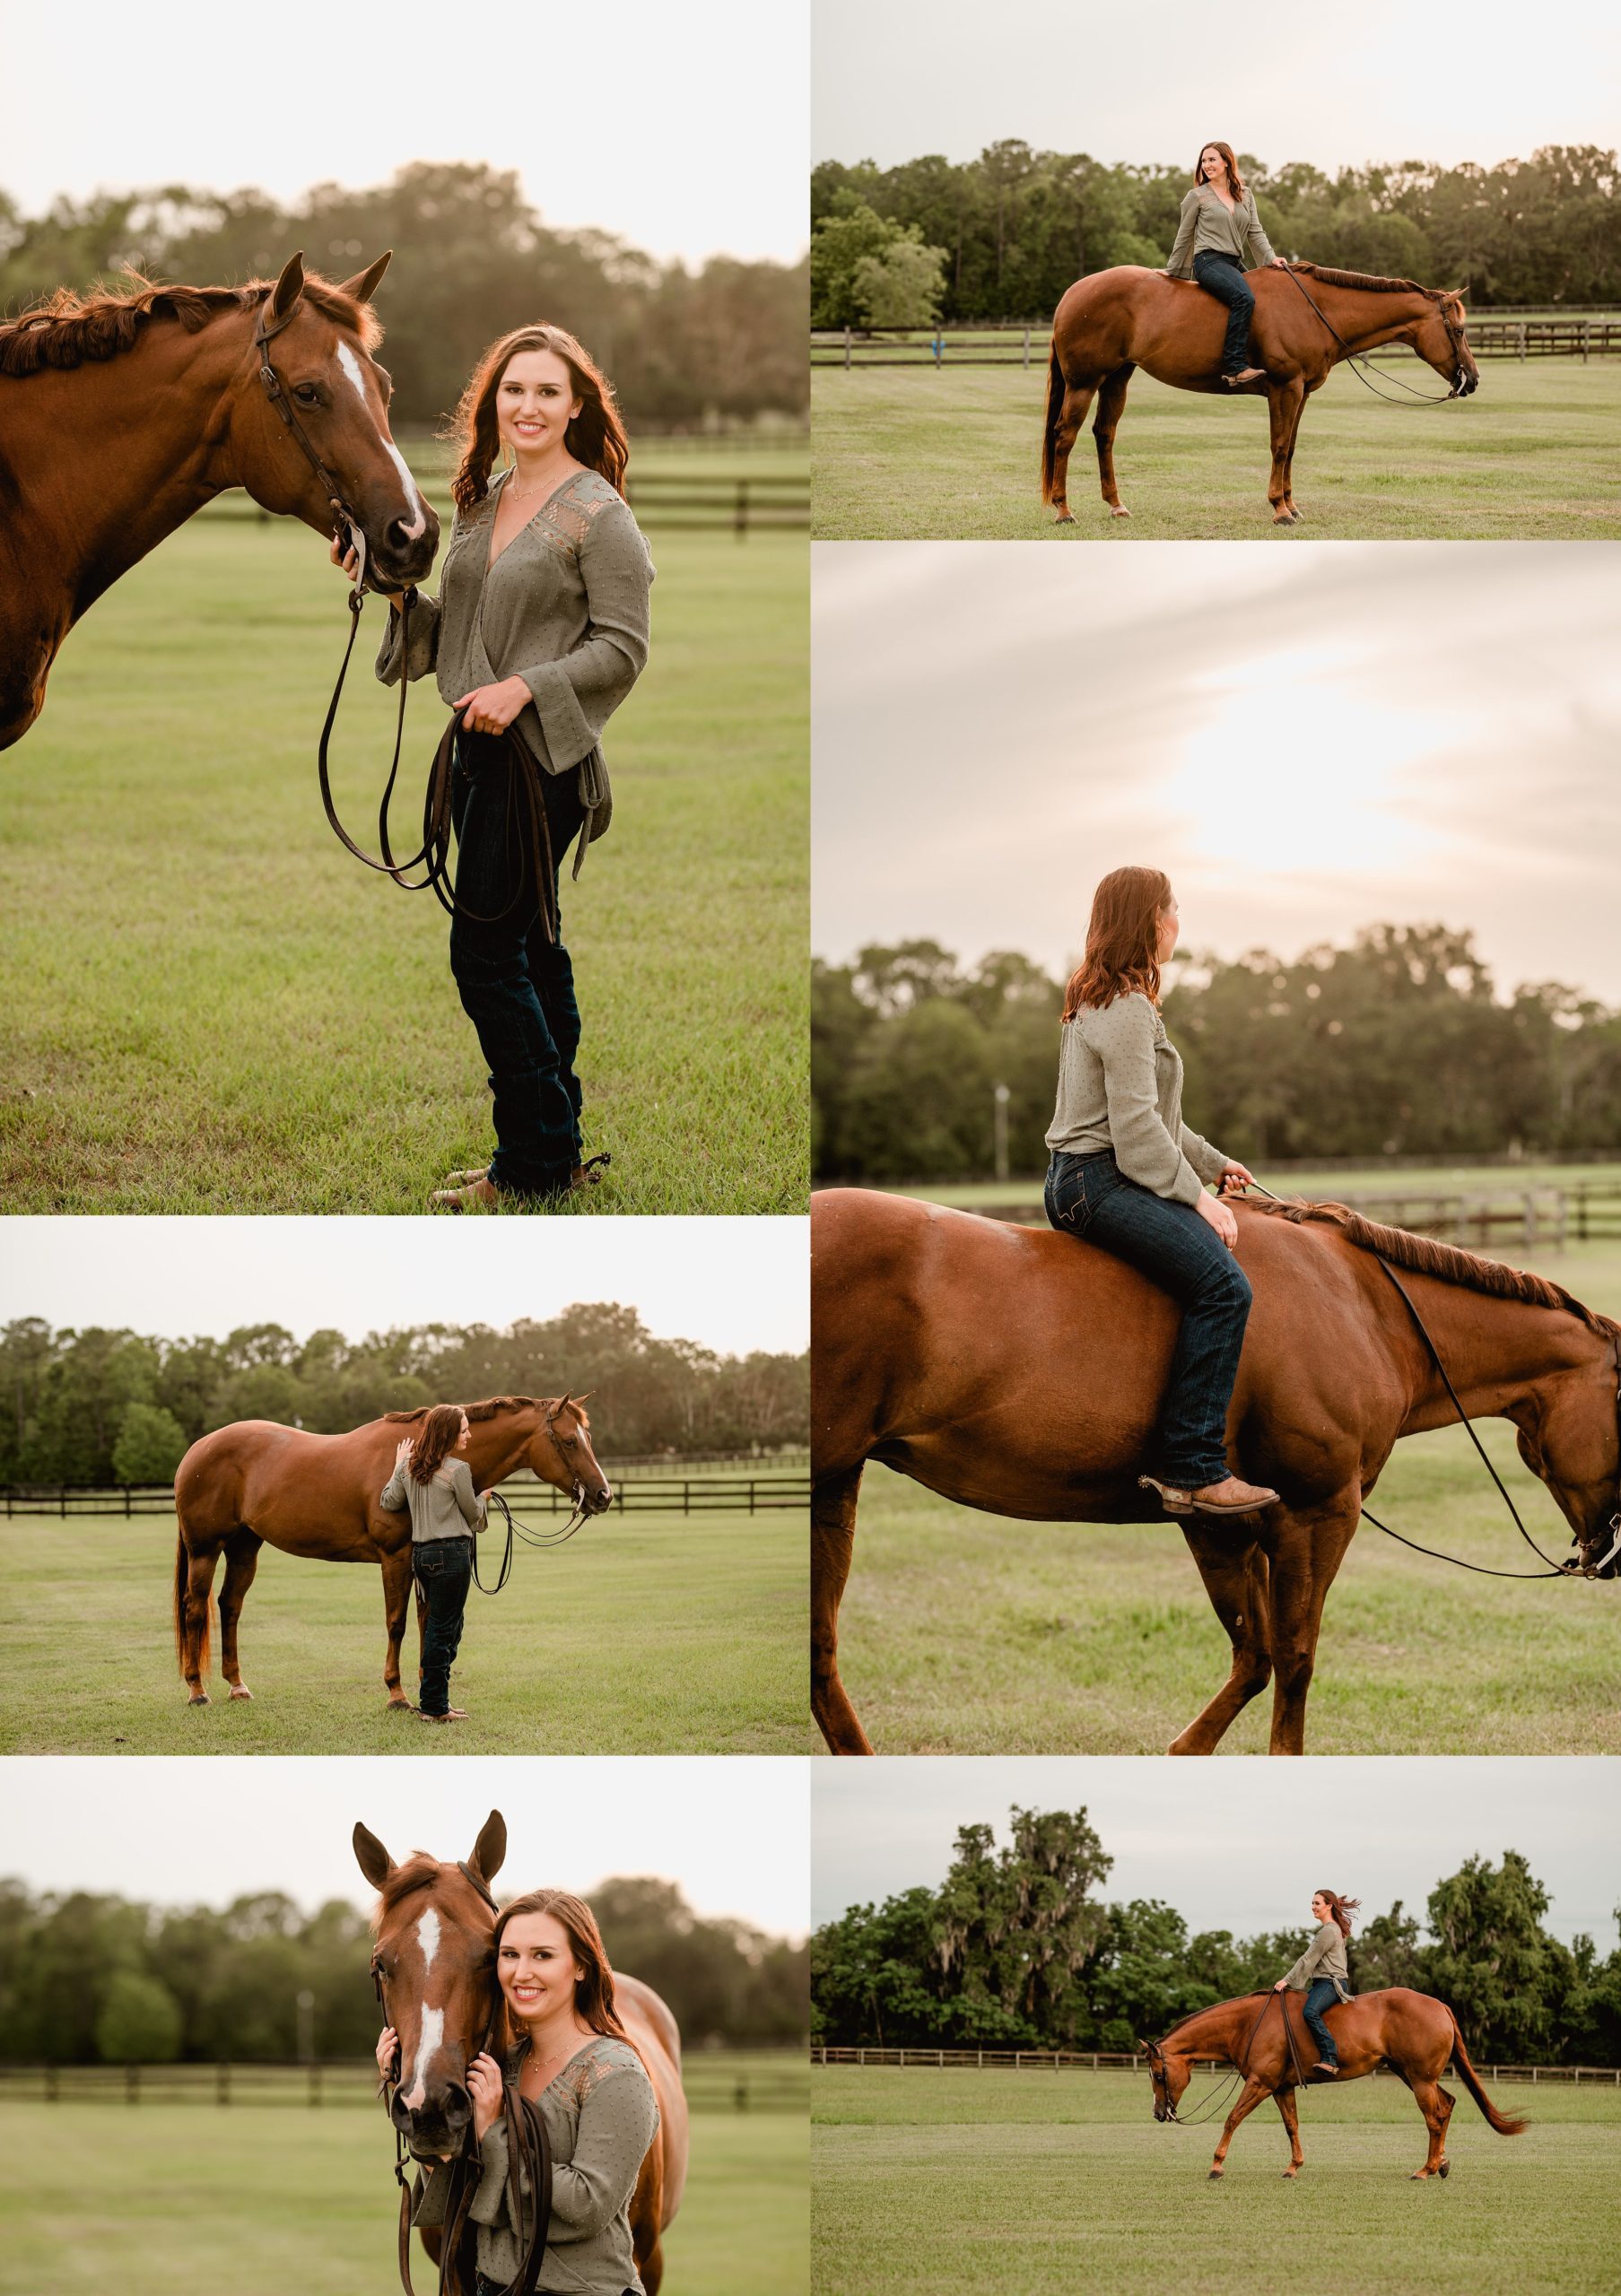 North florida horse photographer specializing in horse and rider candids